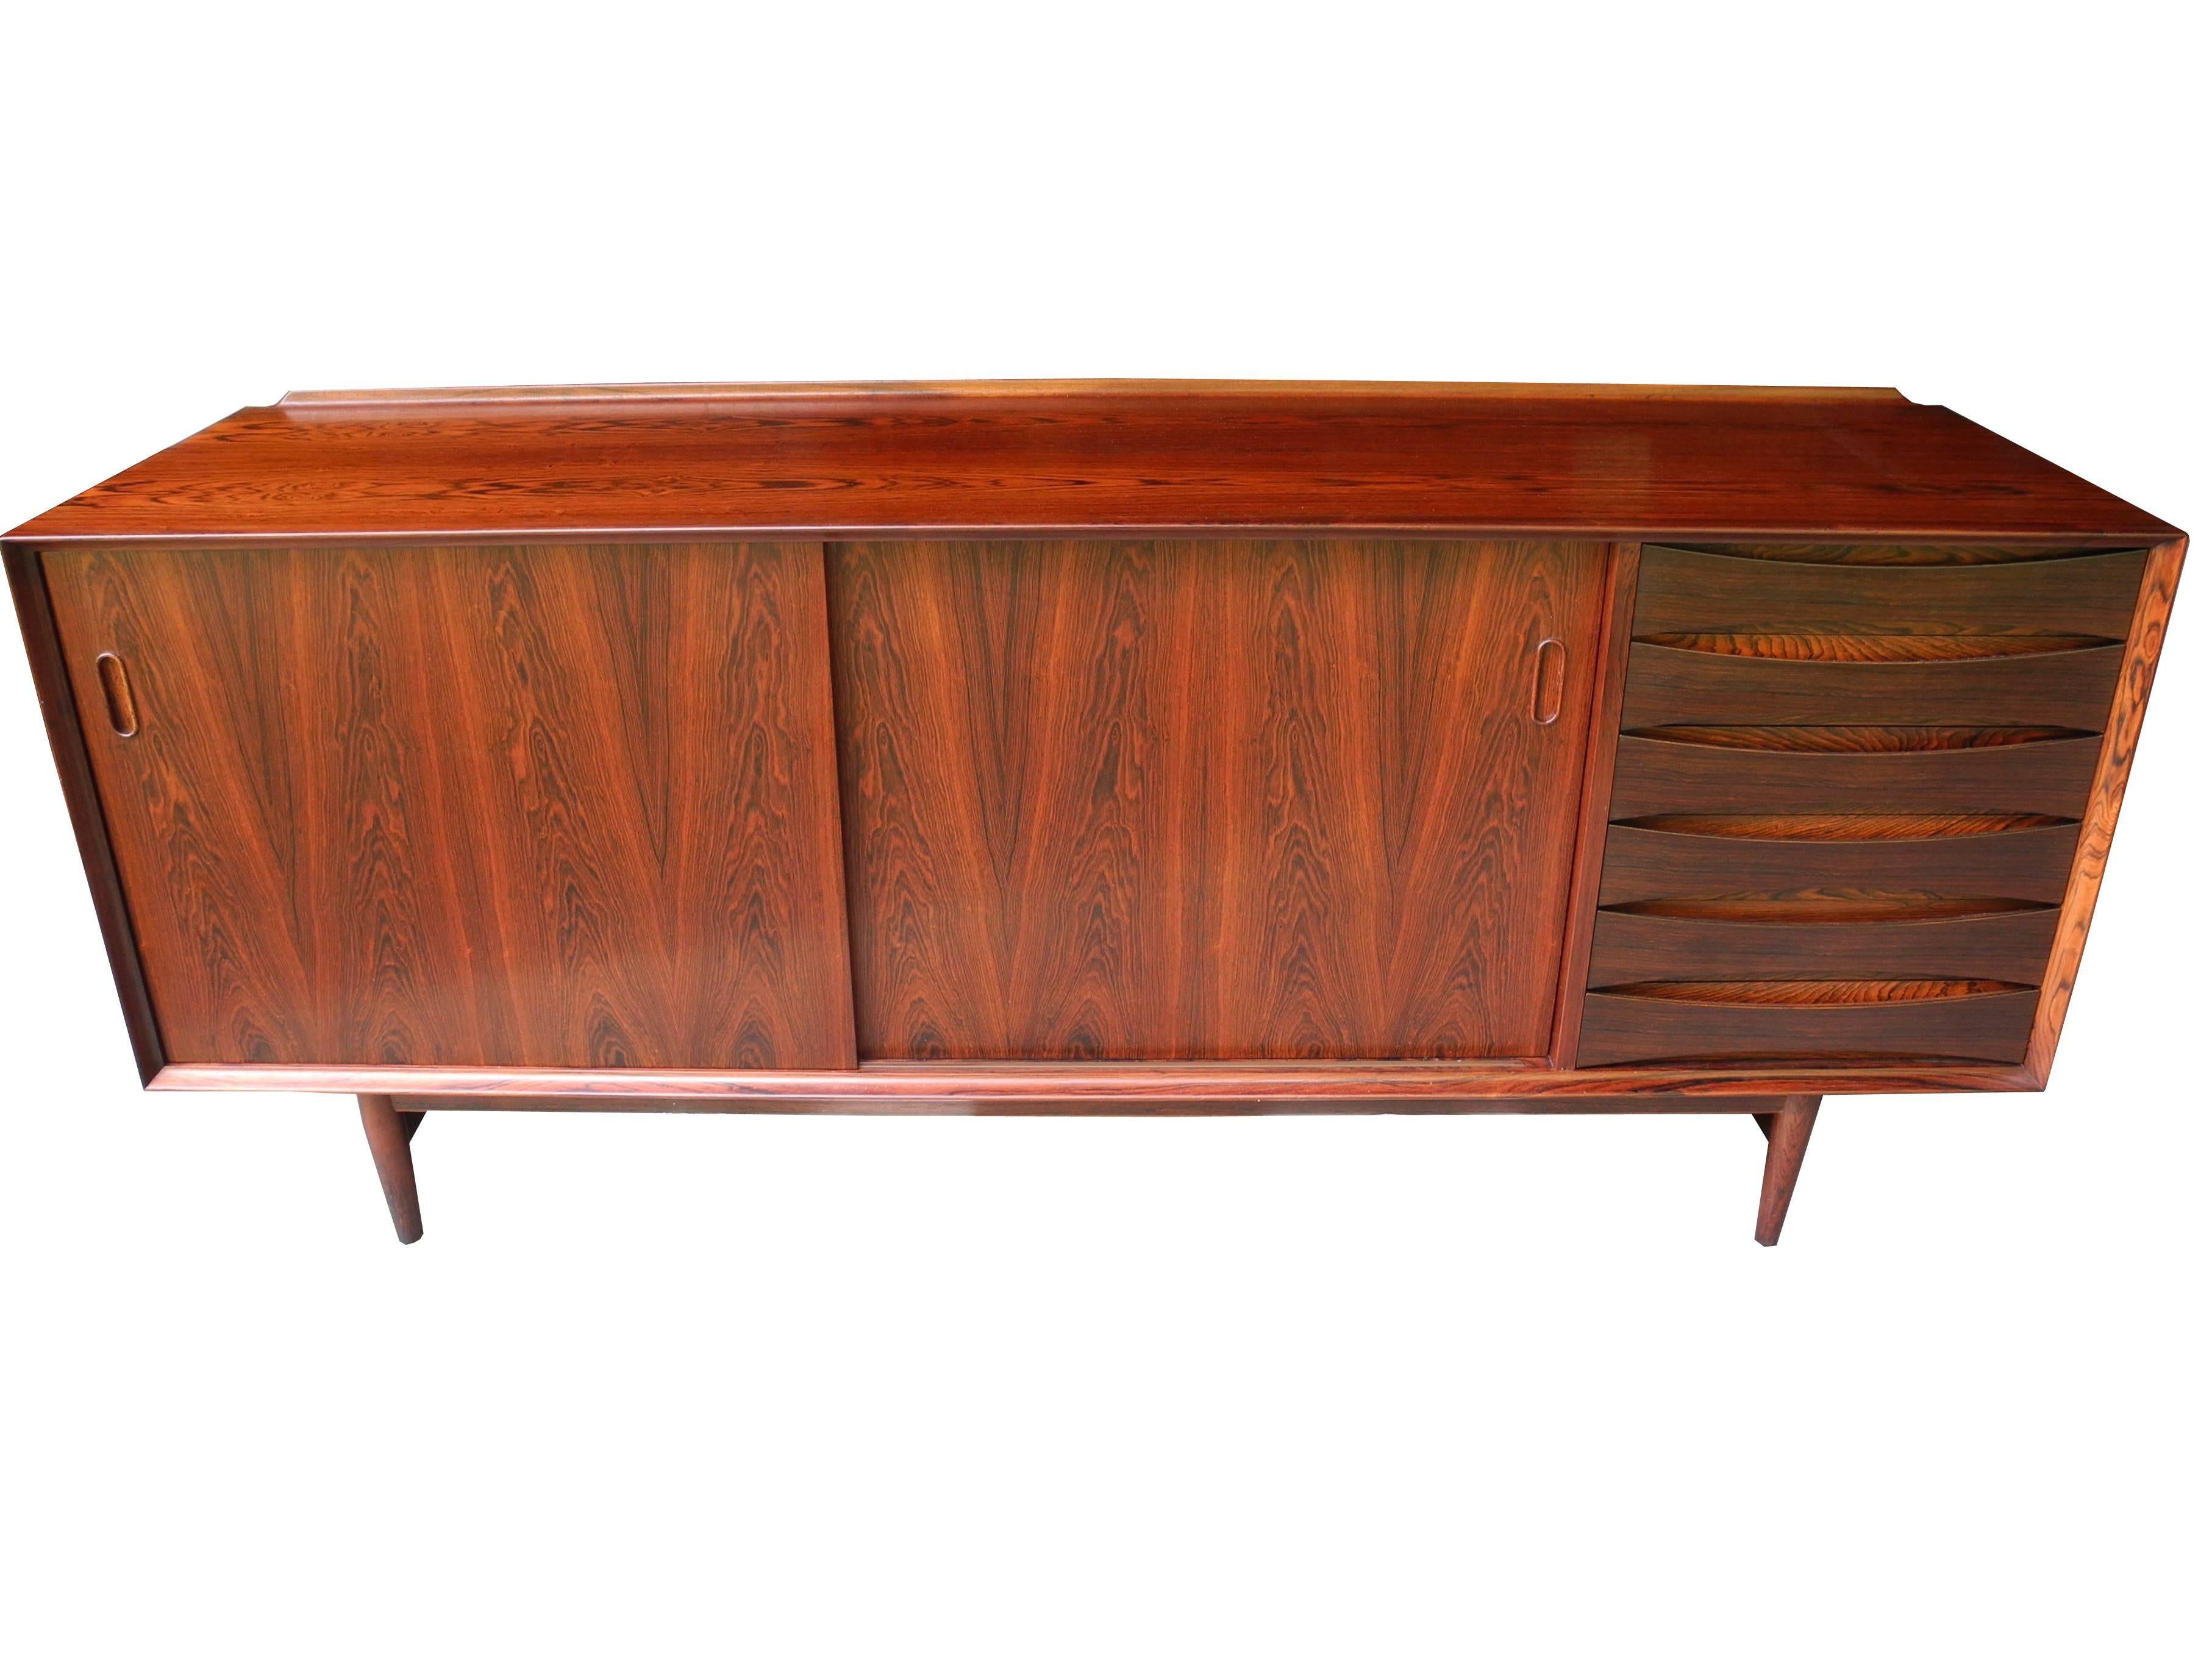 This Danish modern sideboard designed by Arne Vodder and made in Denmark is a rare find in rosewood. This credenza has six drawers on the right and a two-door cabinet with adjustable shelves on the left. The top has a practical designed back lip.